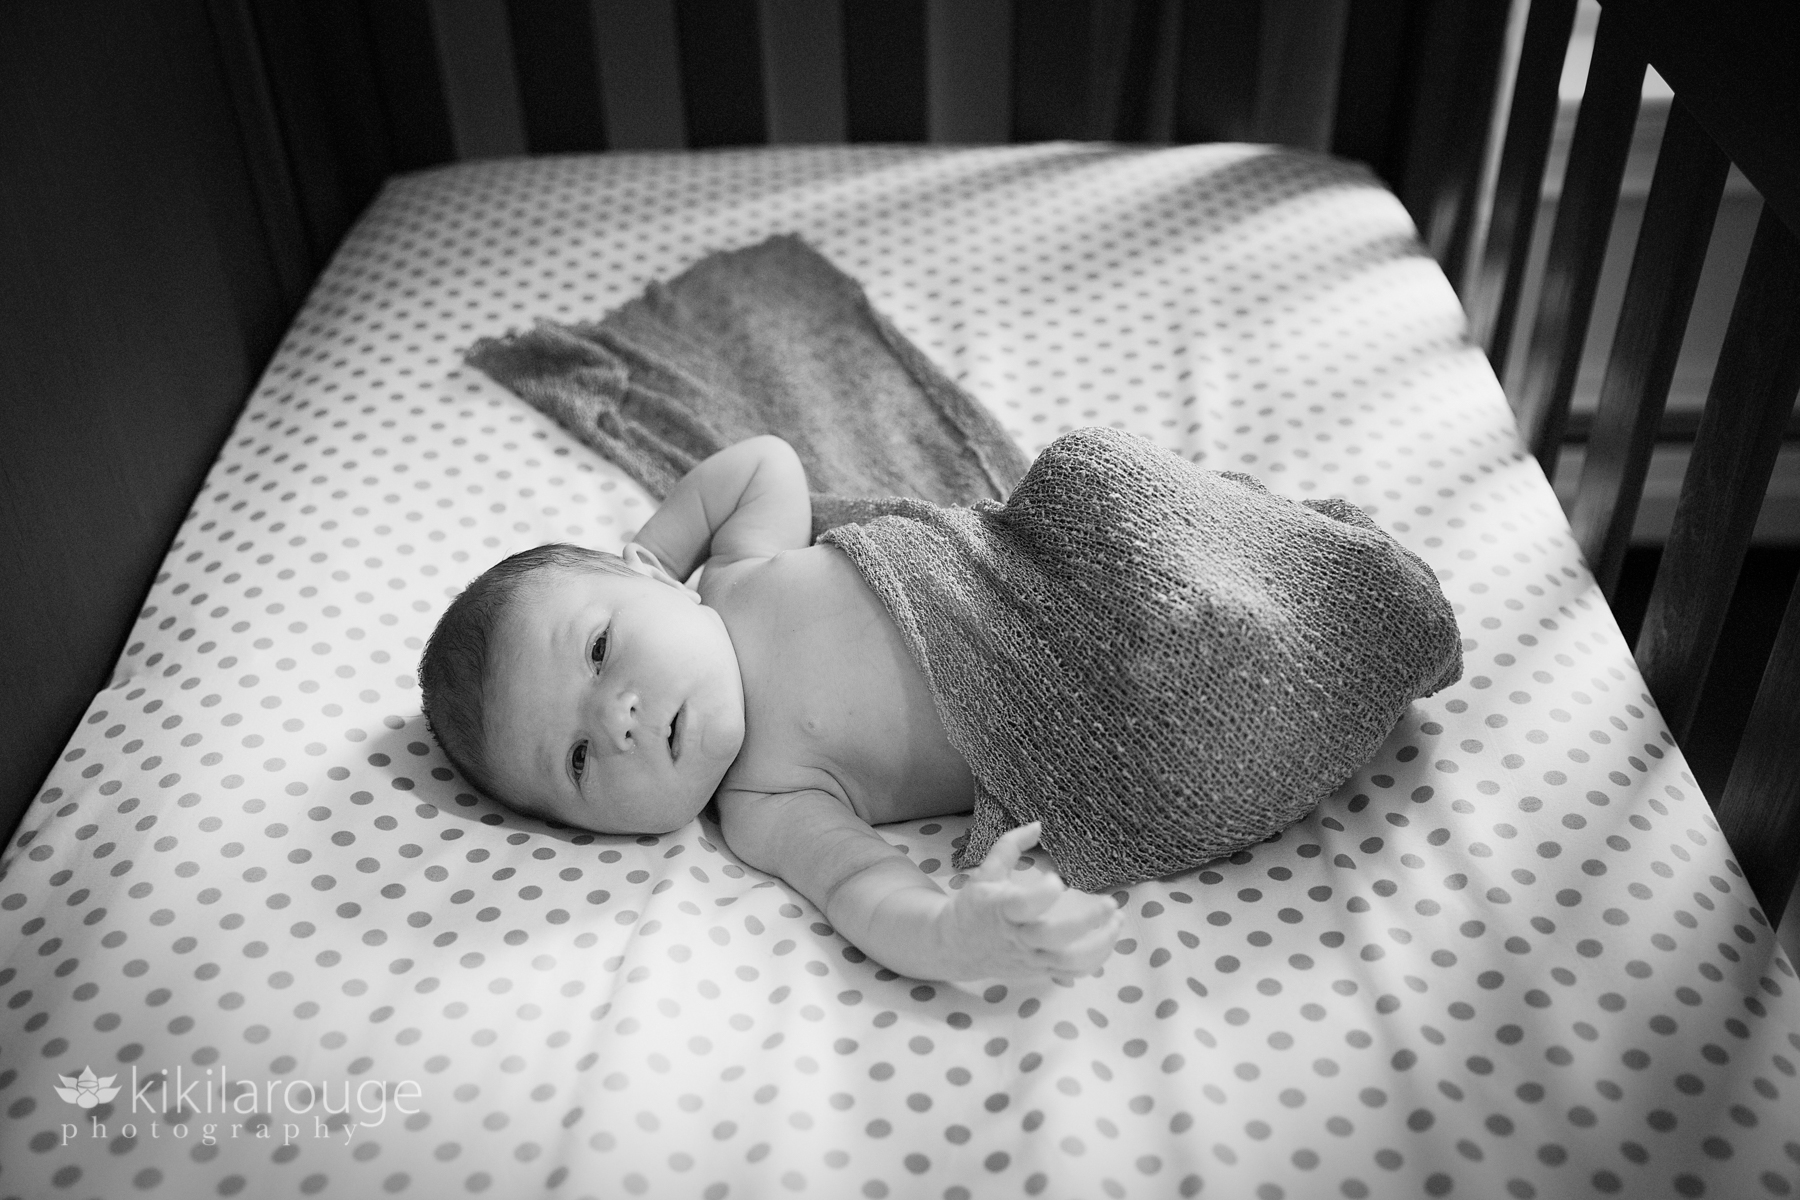 Newborn baby wrapped in swaddle in crib with polka dot sheets